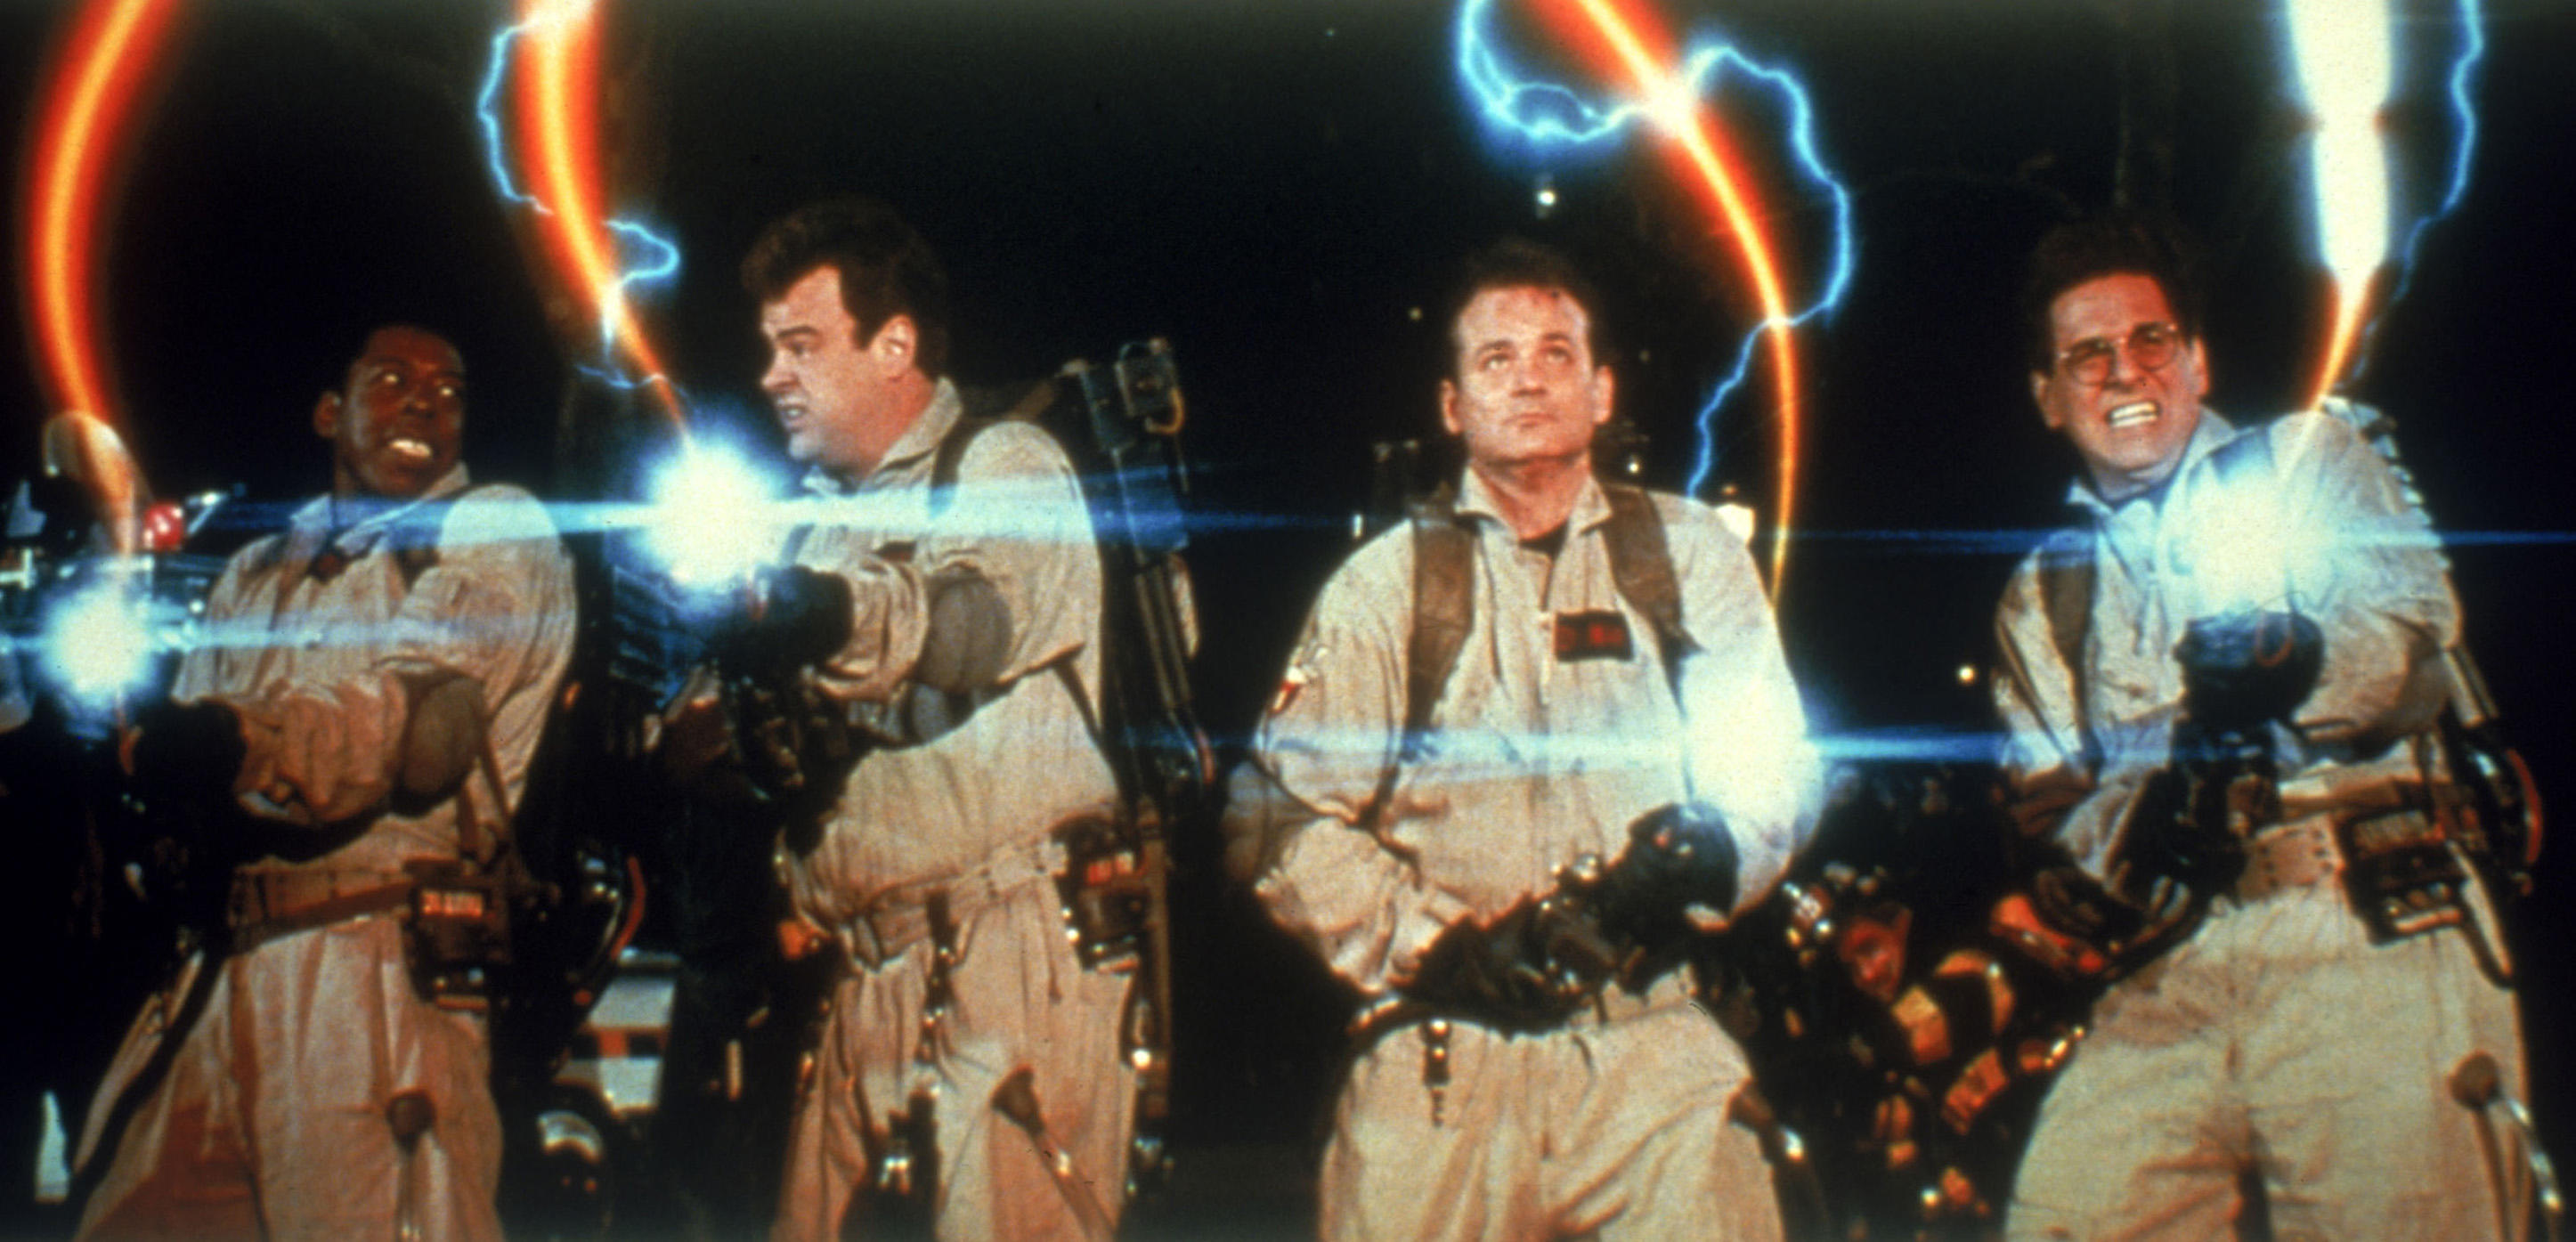 Ernie Hudson, Dan Aykroyd, and Bill Murray still hold a place in the franchise while honoring the late Harold Ramis